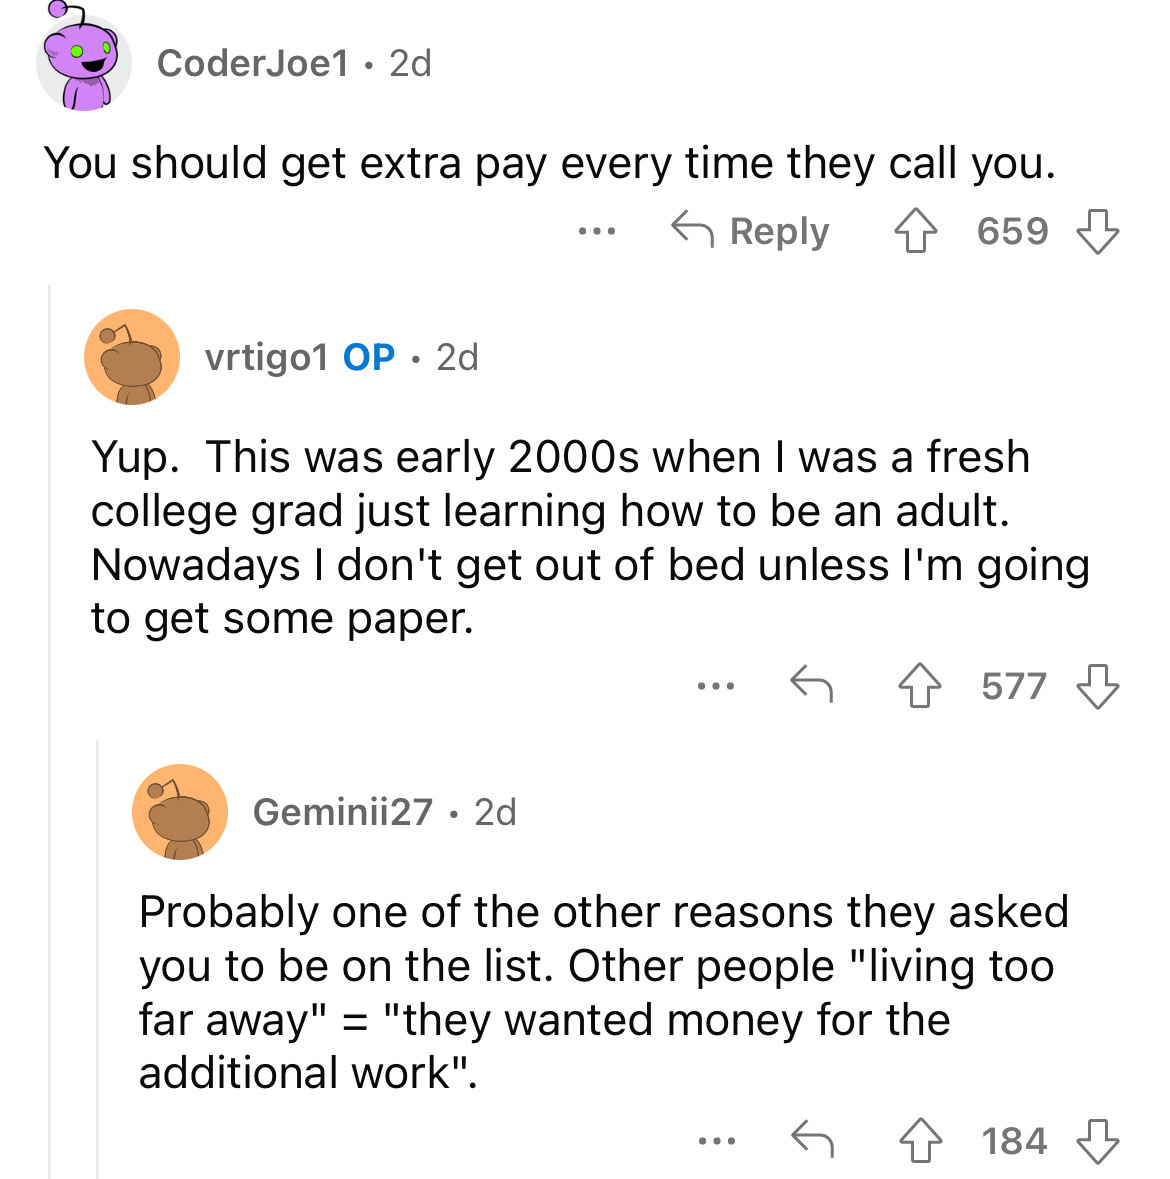 screenshot - Coder Joe1 2d You should get extra pay every time they call you. vrtigo1 Op 2d 659 Yup. This was early 2000s when I was a fresh college grad just learning how to be an adult. Nowadays I don't get out of bed unless I'm going to get some paper.